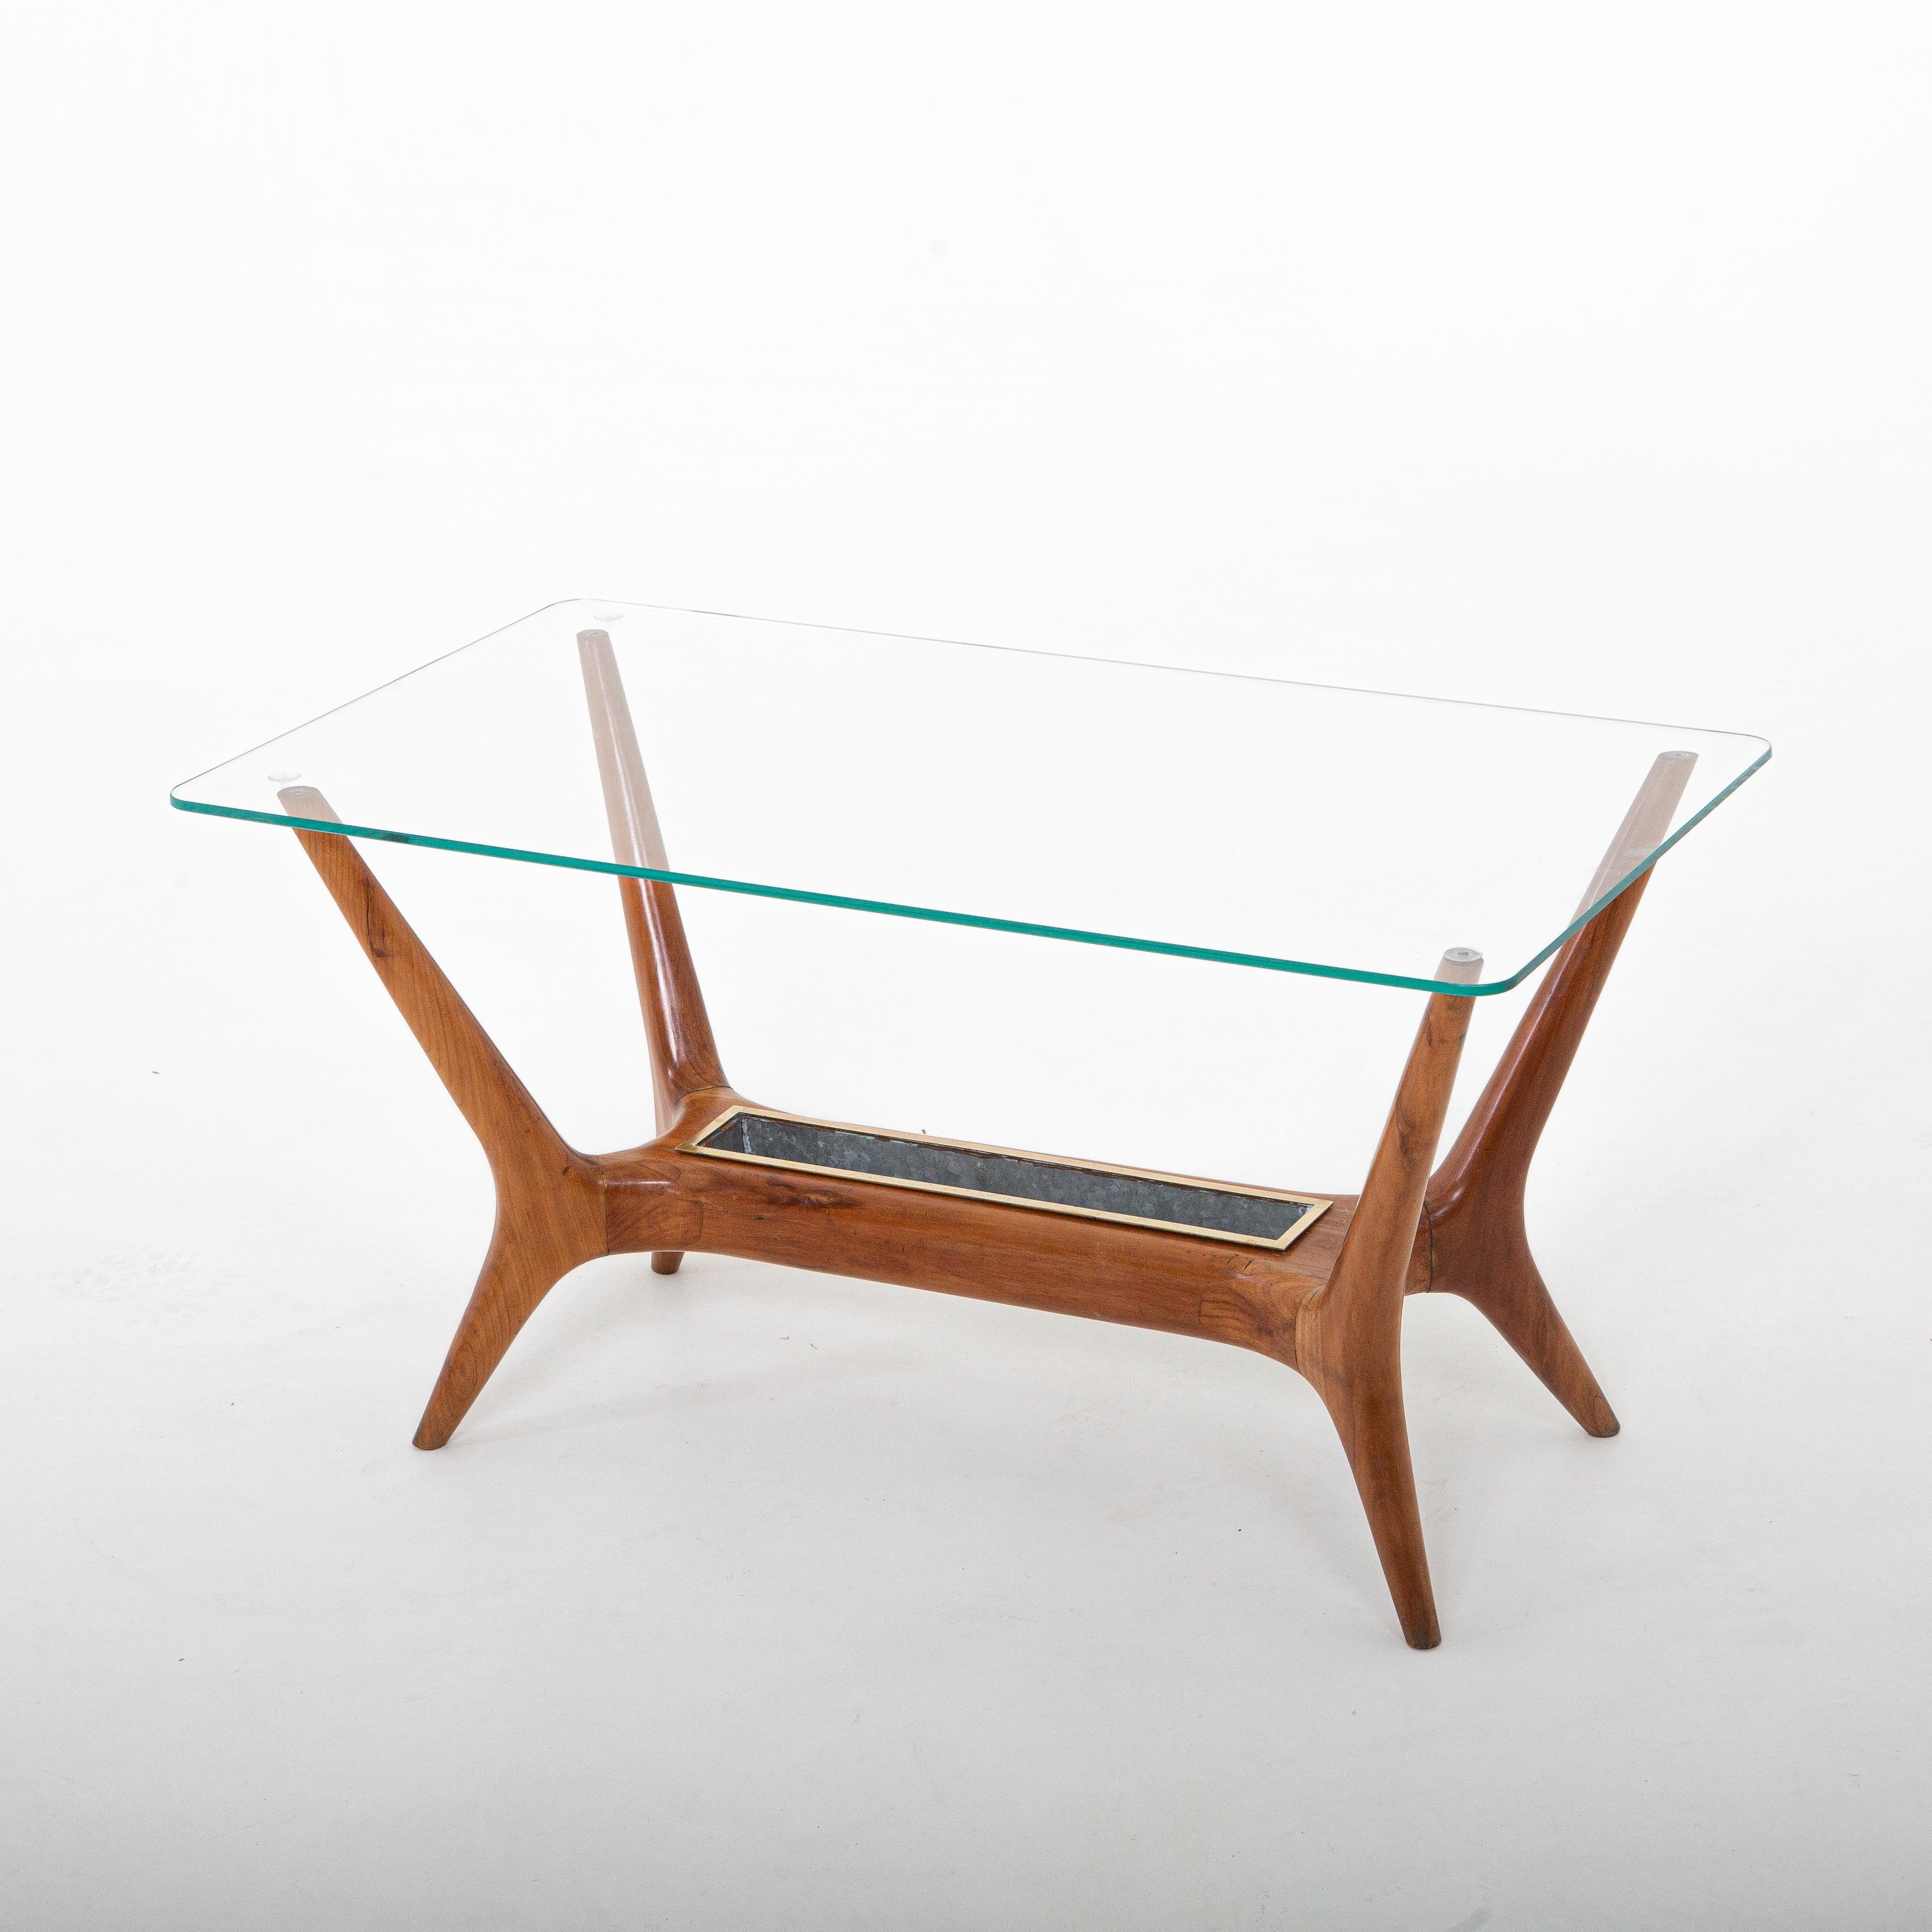 Italian Modernist Cocktail Table Attributed to Gio Ponti In Good Condition For Sale In New York, NY